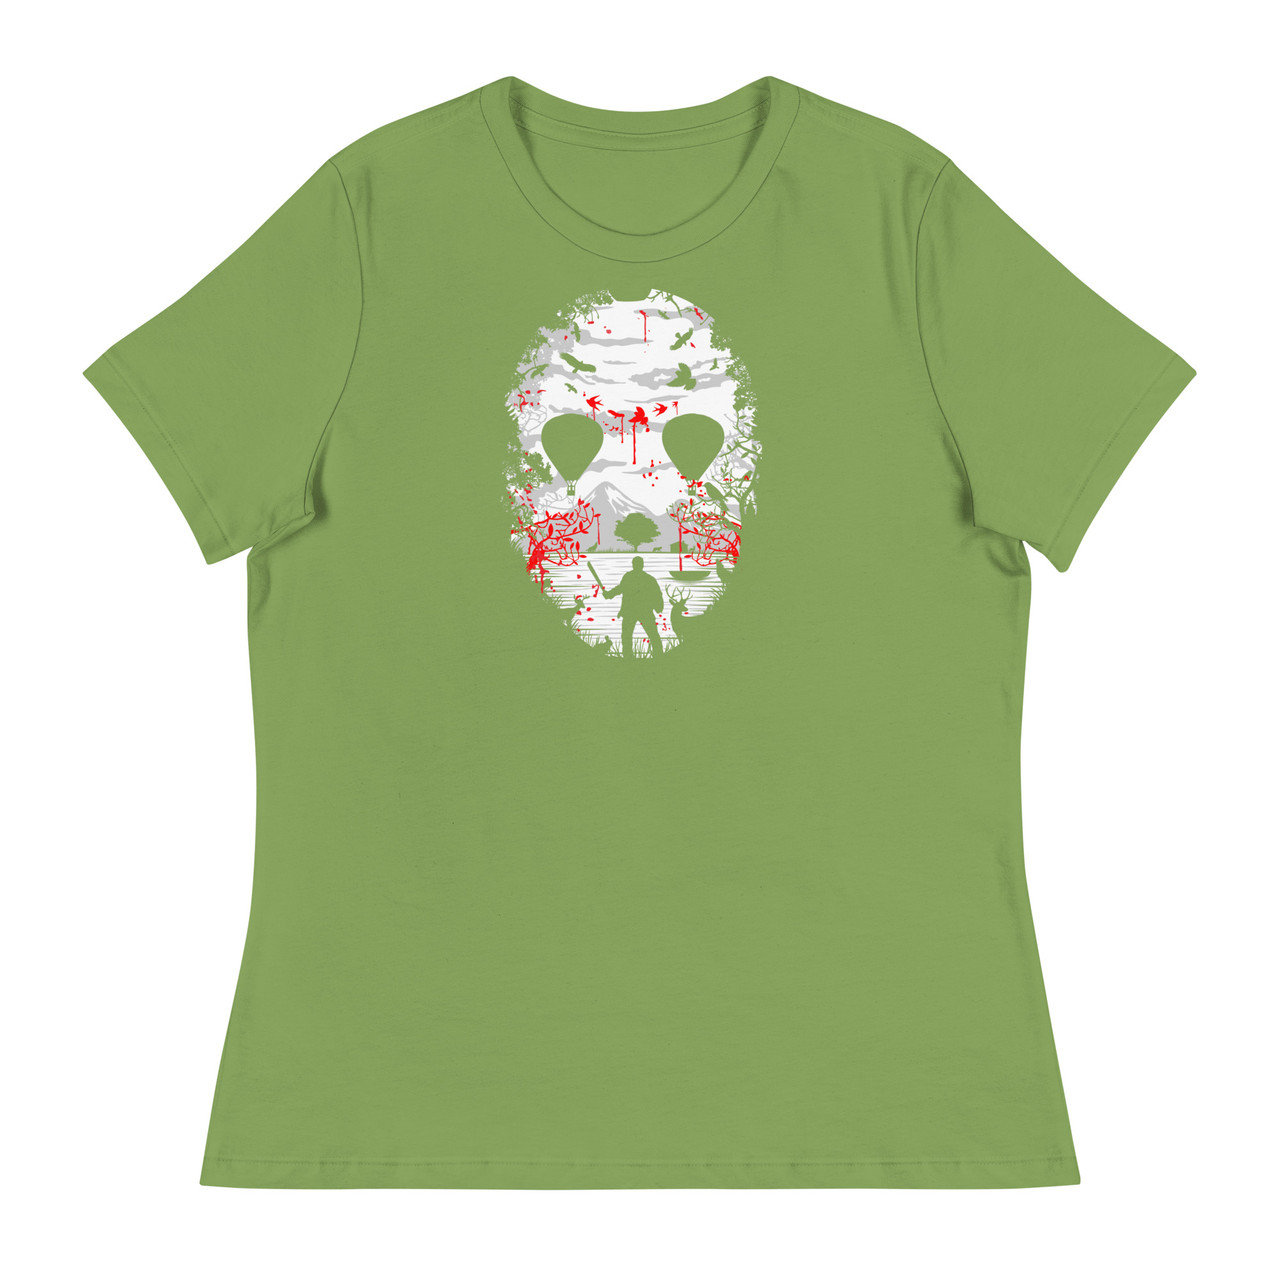 Crystal Lake Women's Relaxed T-Shirt - Bella + Canvas 6400 